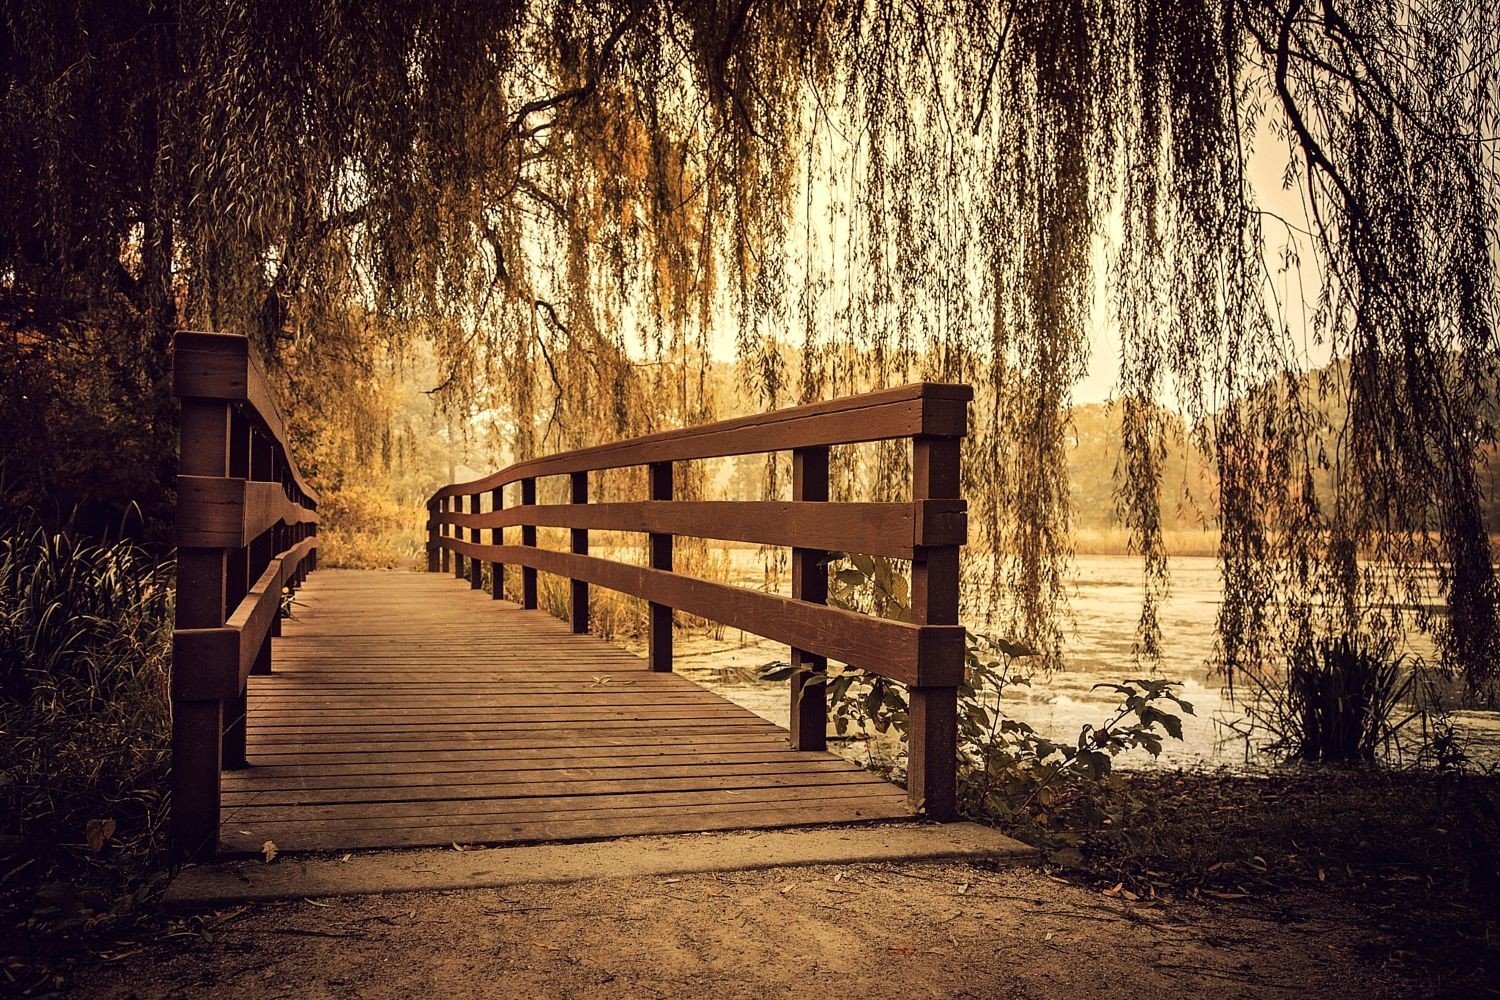 nature, Photography, Landscape, Wooden surface, Bridge, Willow trees, River, Path, Illinois Wallpaper